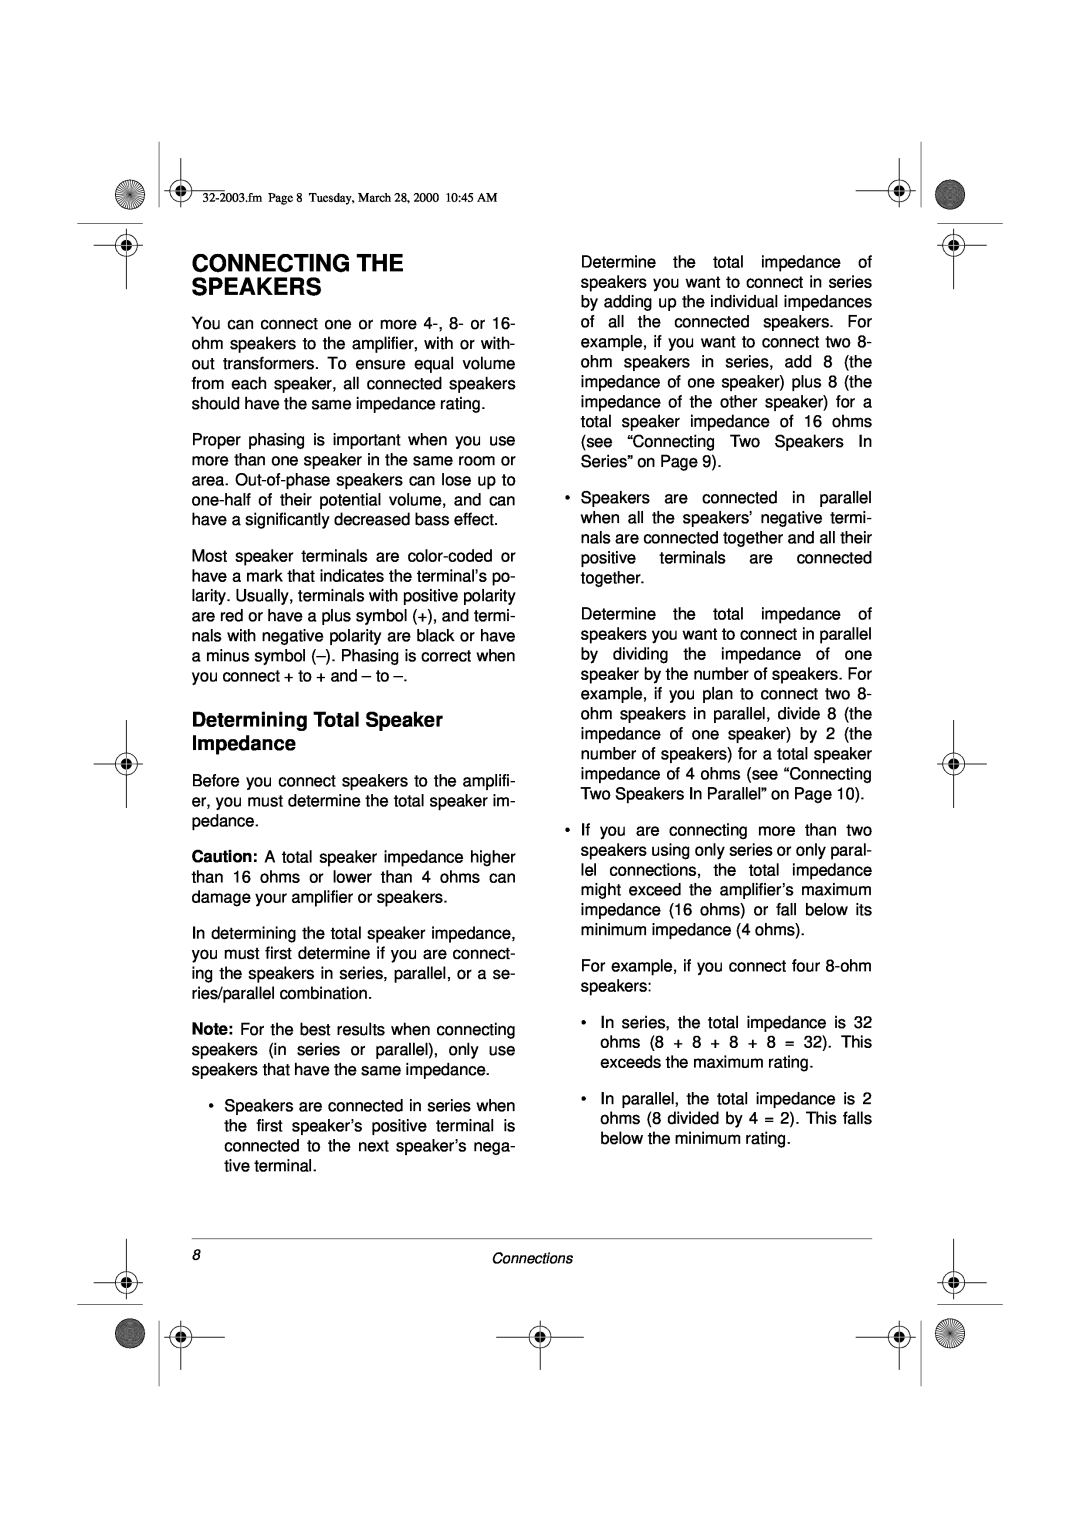 Radio Shack MPA-125 owner manual Connecting The Speakers, Determining Total Speaker Impedance 